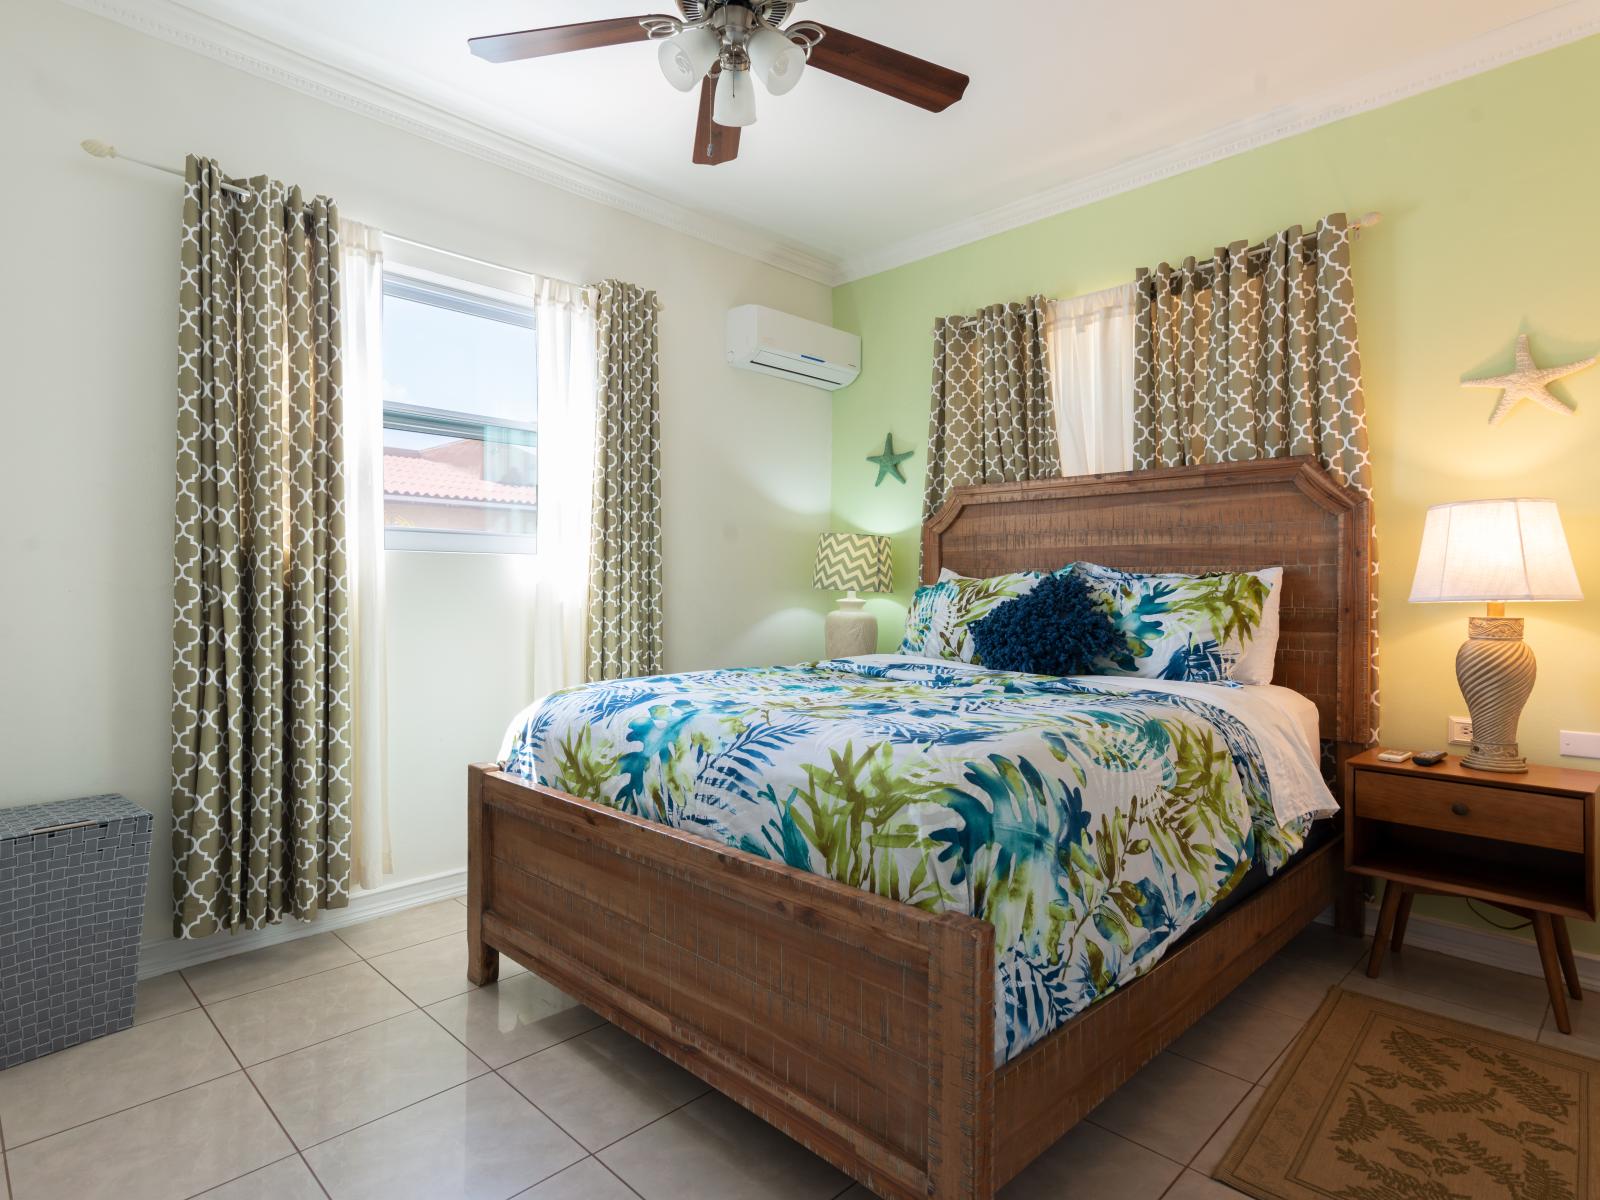 Wrap yourself in comfort in our tranquil bedroom of the home in Noord Aruba - Features a queen size bed and warm atmosphere with plenty of natural light - Thoughtfully designed bedroom featuring functional and stylish furniture